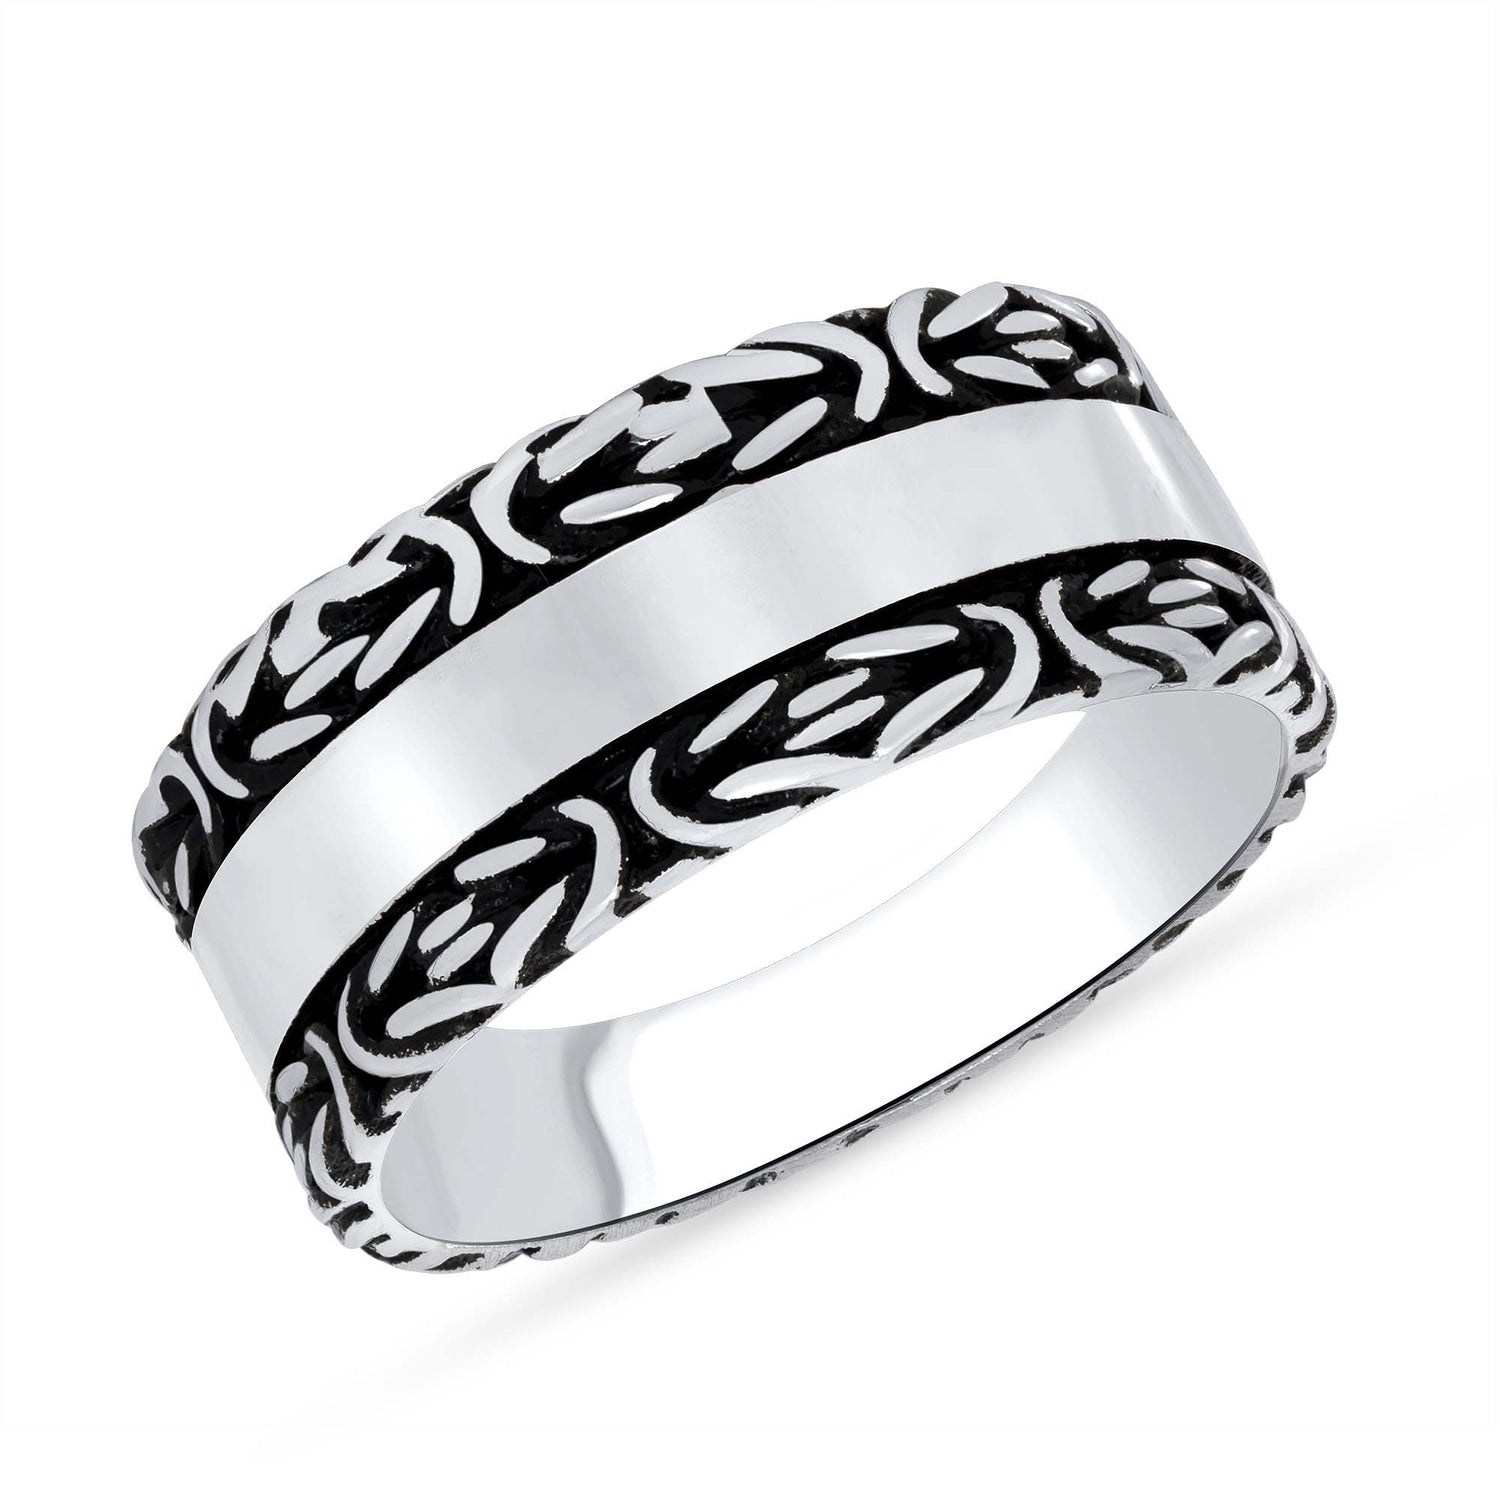 Oxidized 925 Sterling Silver Plain Band &amp; Whicker Spiral Men&